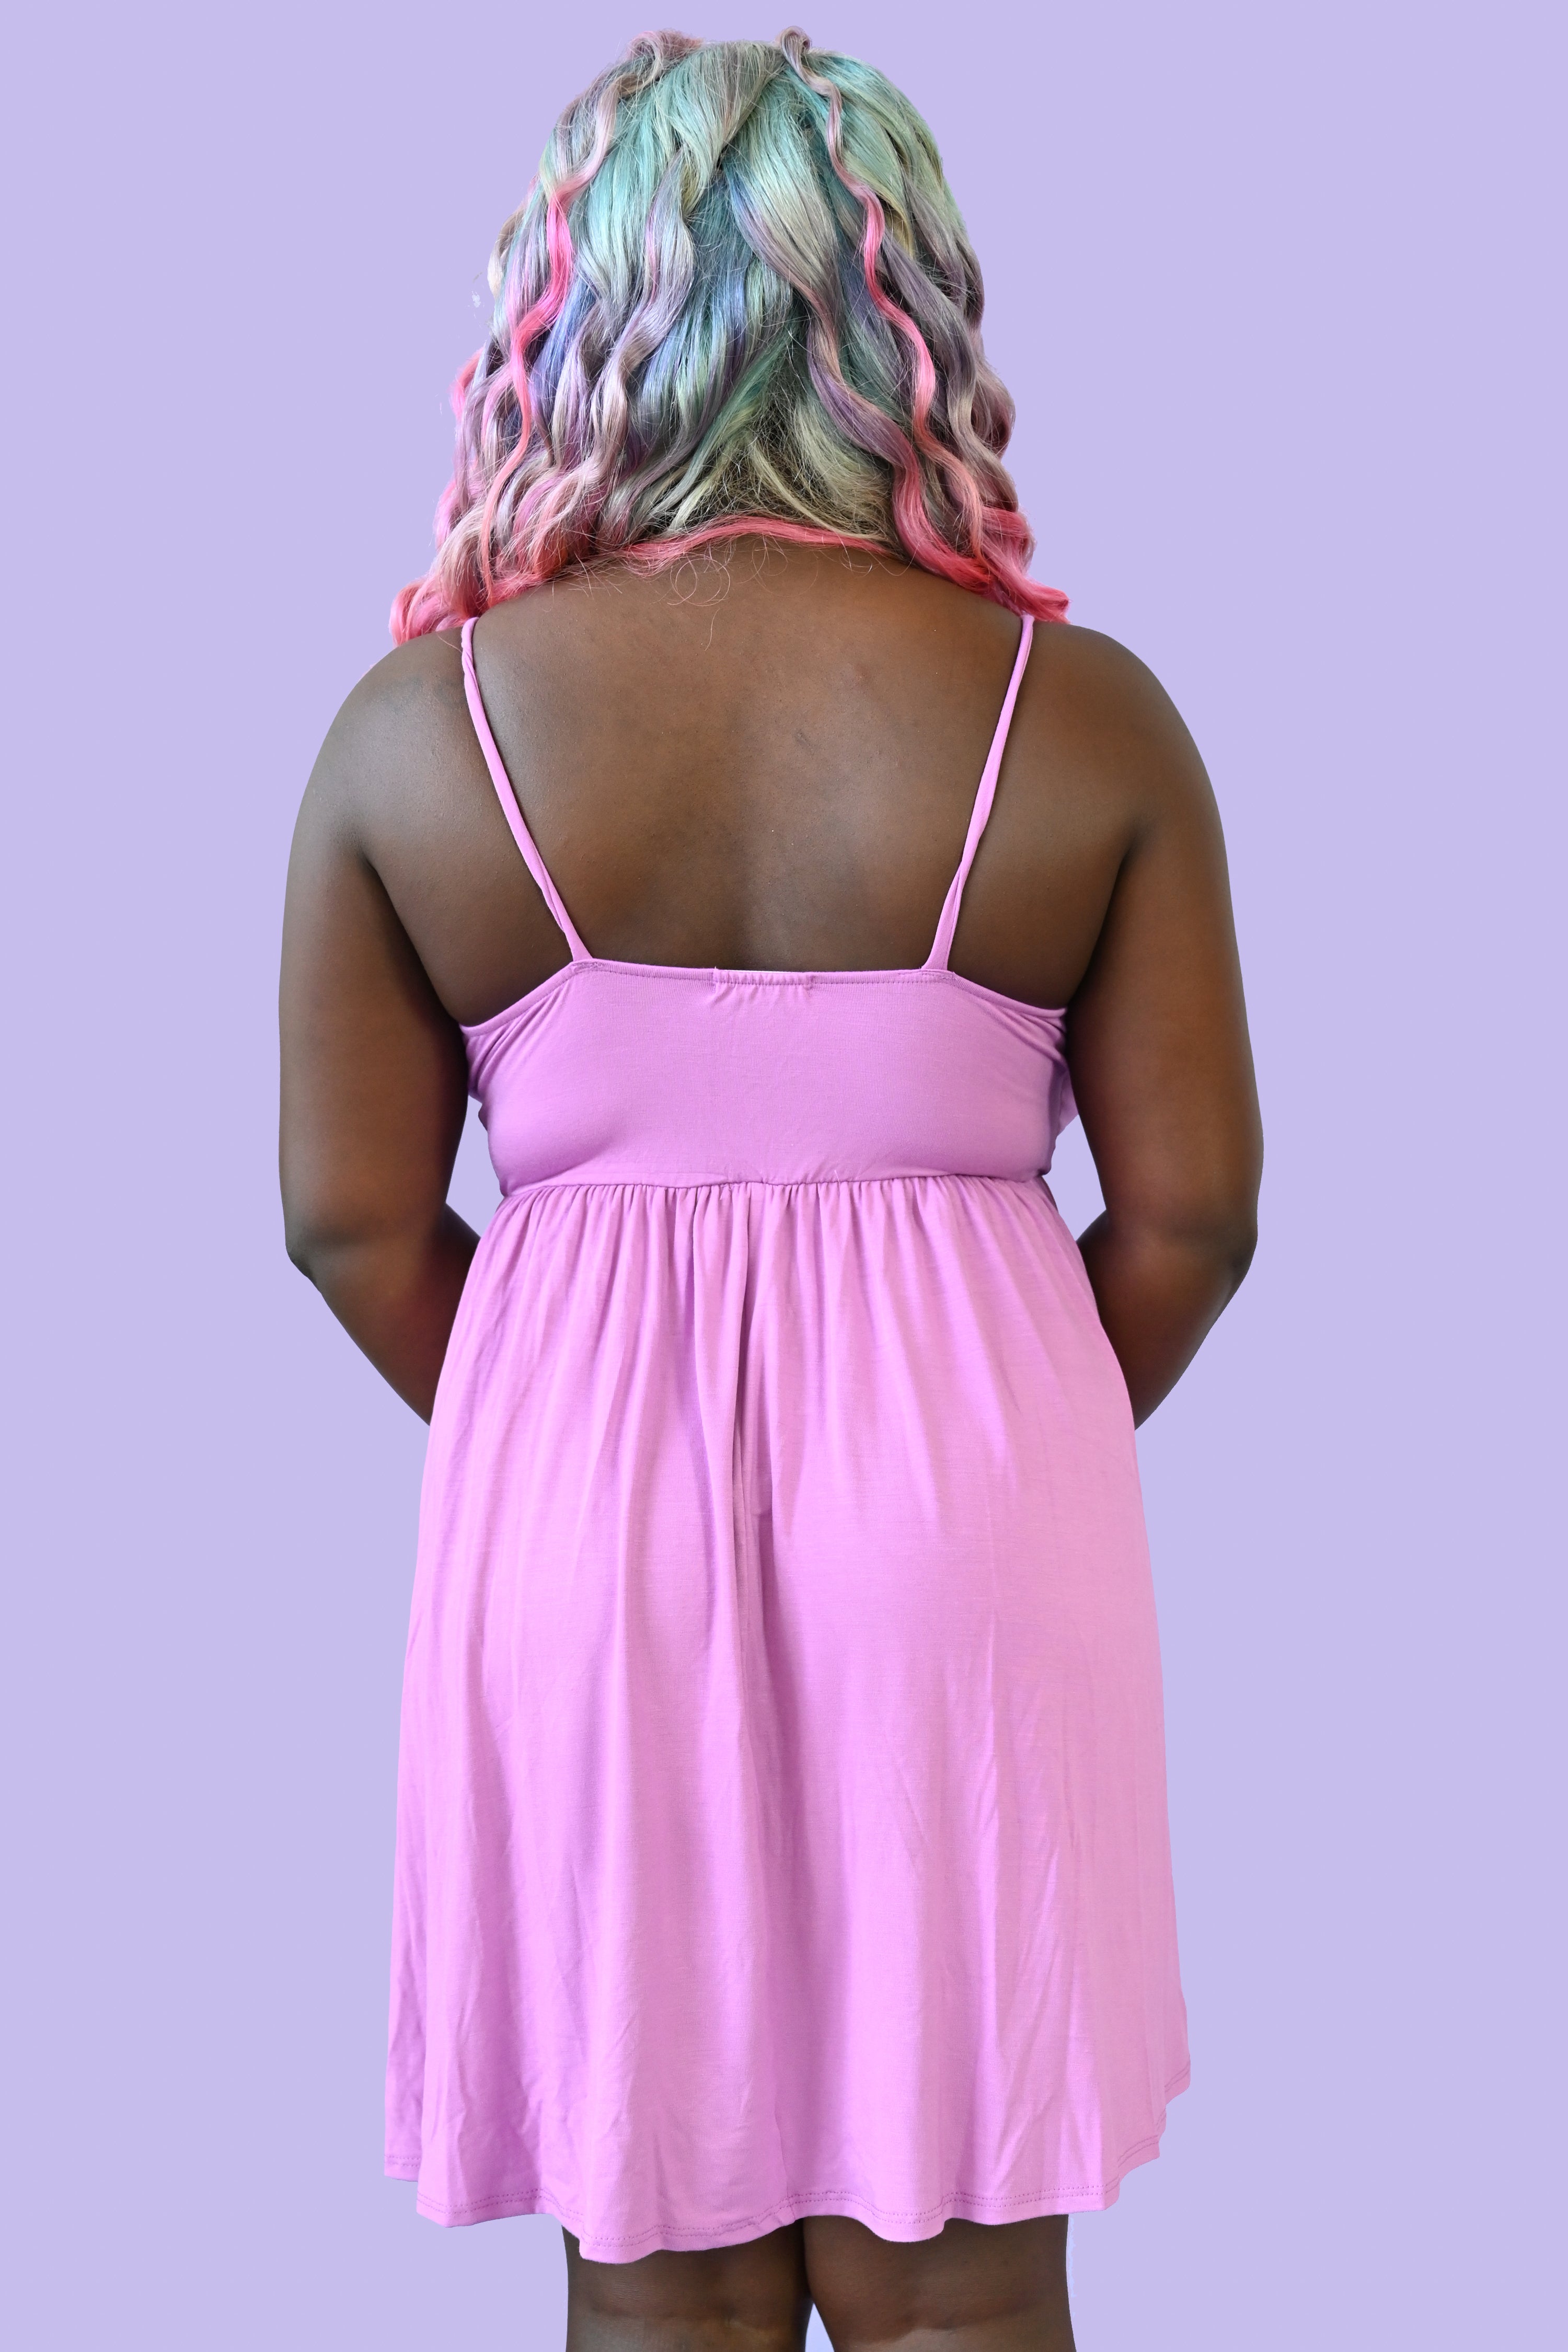 backview of the bestie dress showing spaghetti strap style thin straps